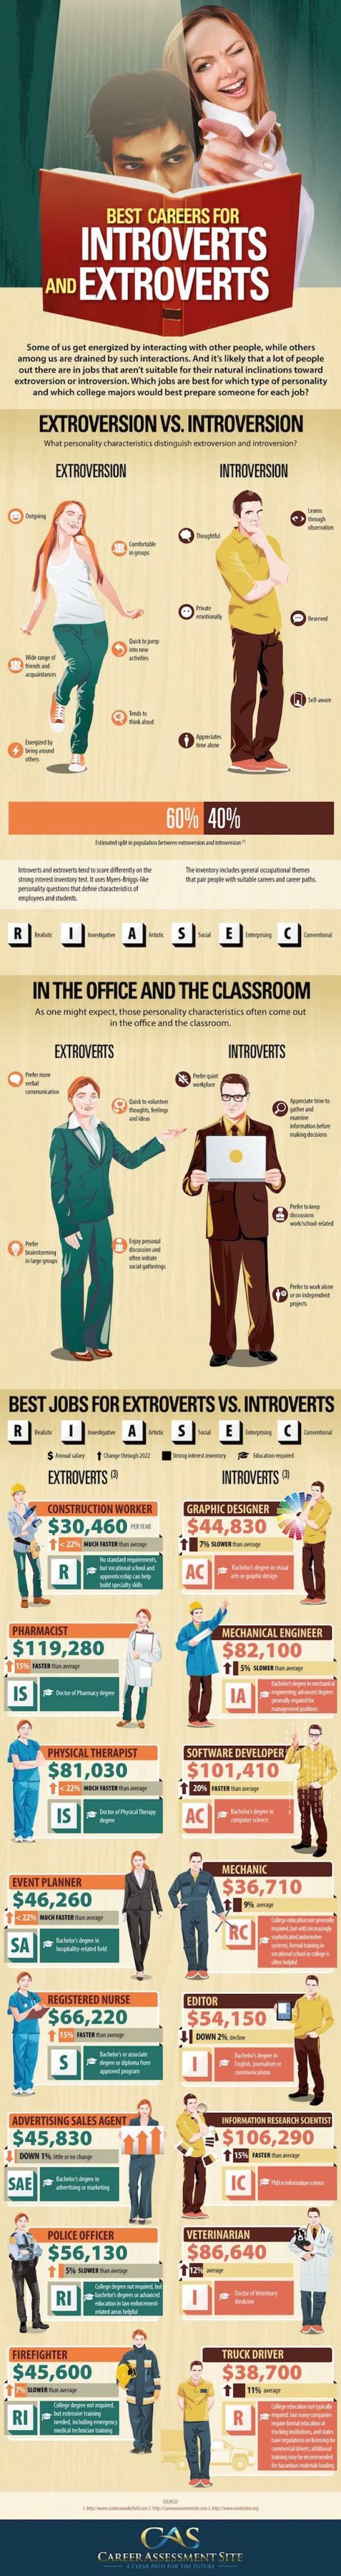 8 Career Ideas For Introverts To Make Them Happy